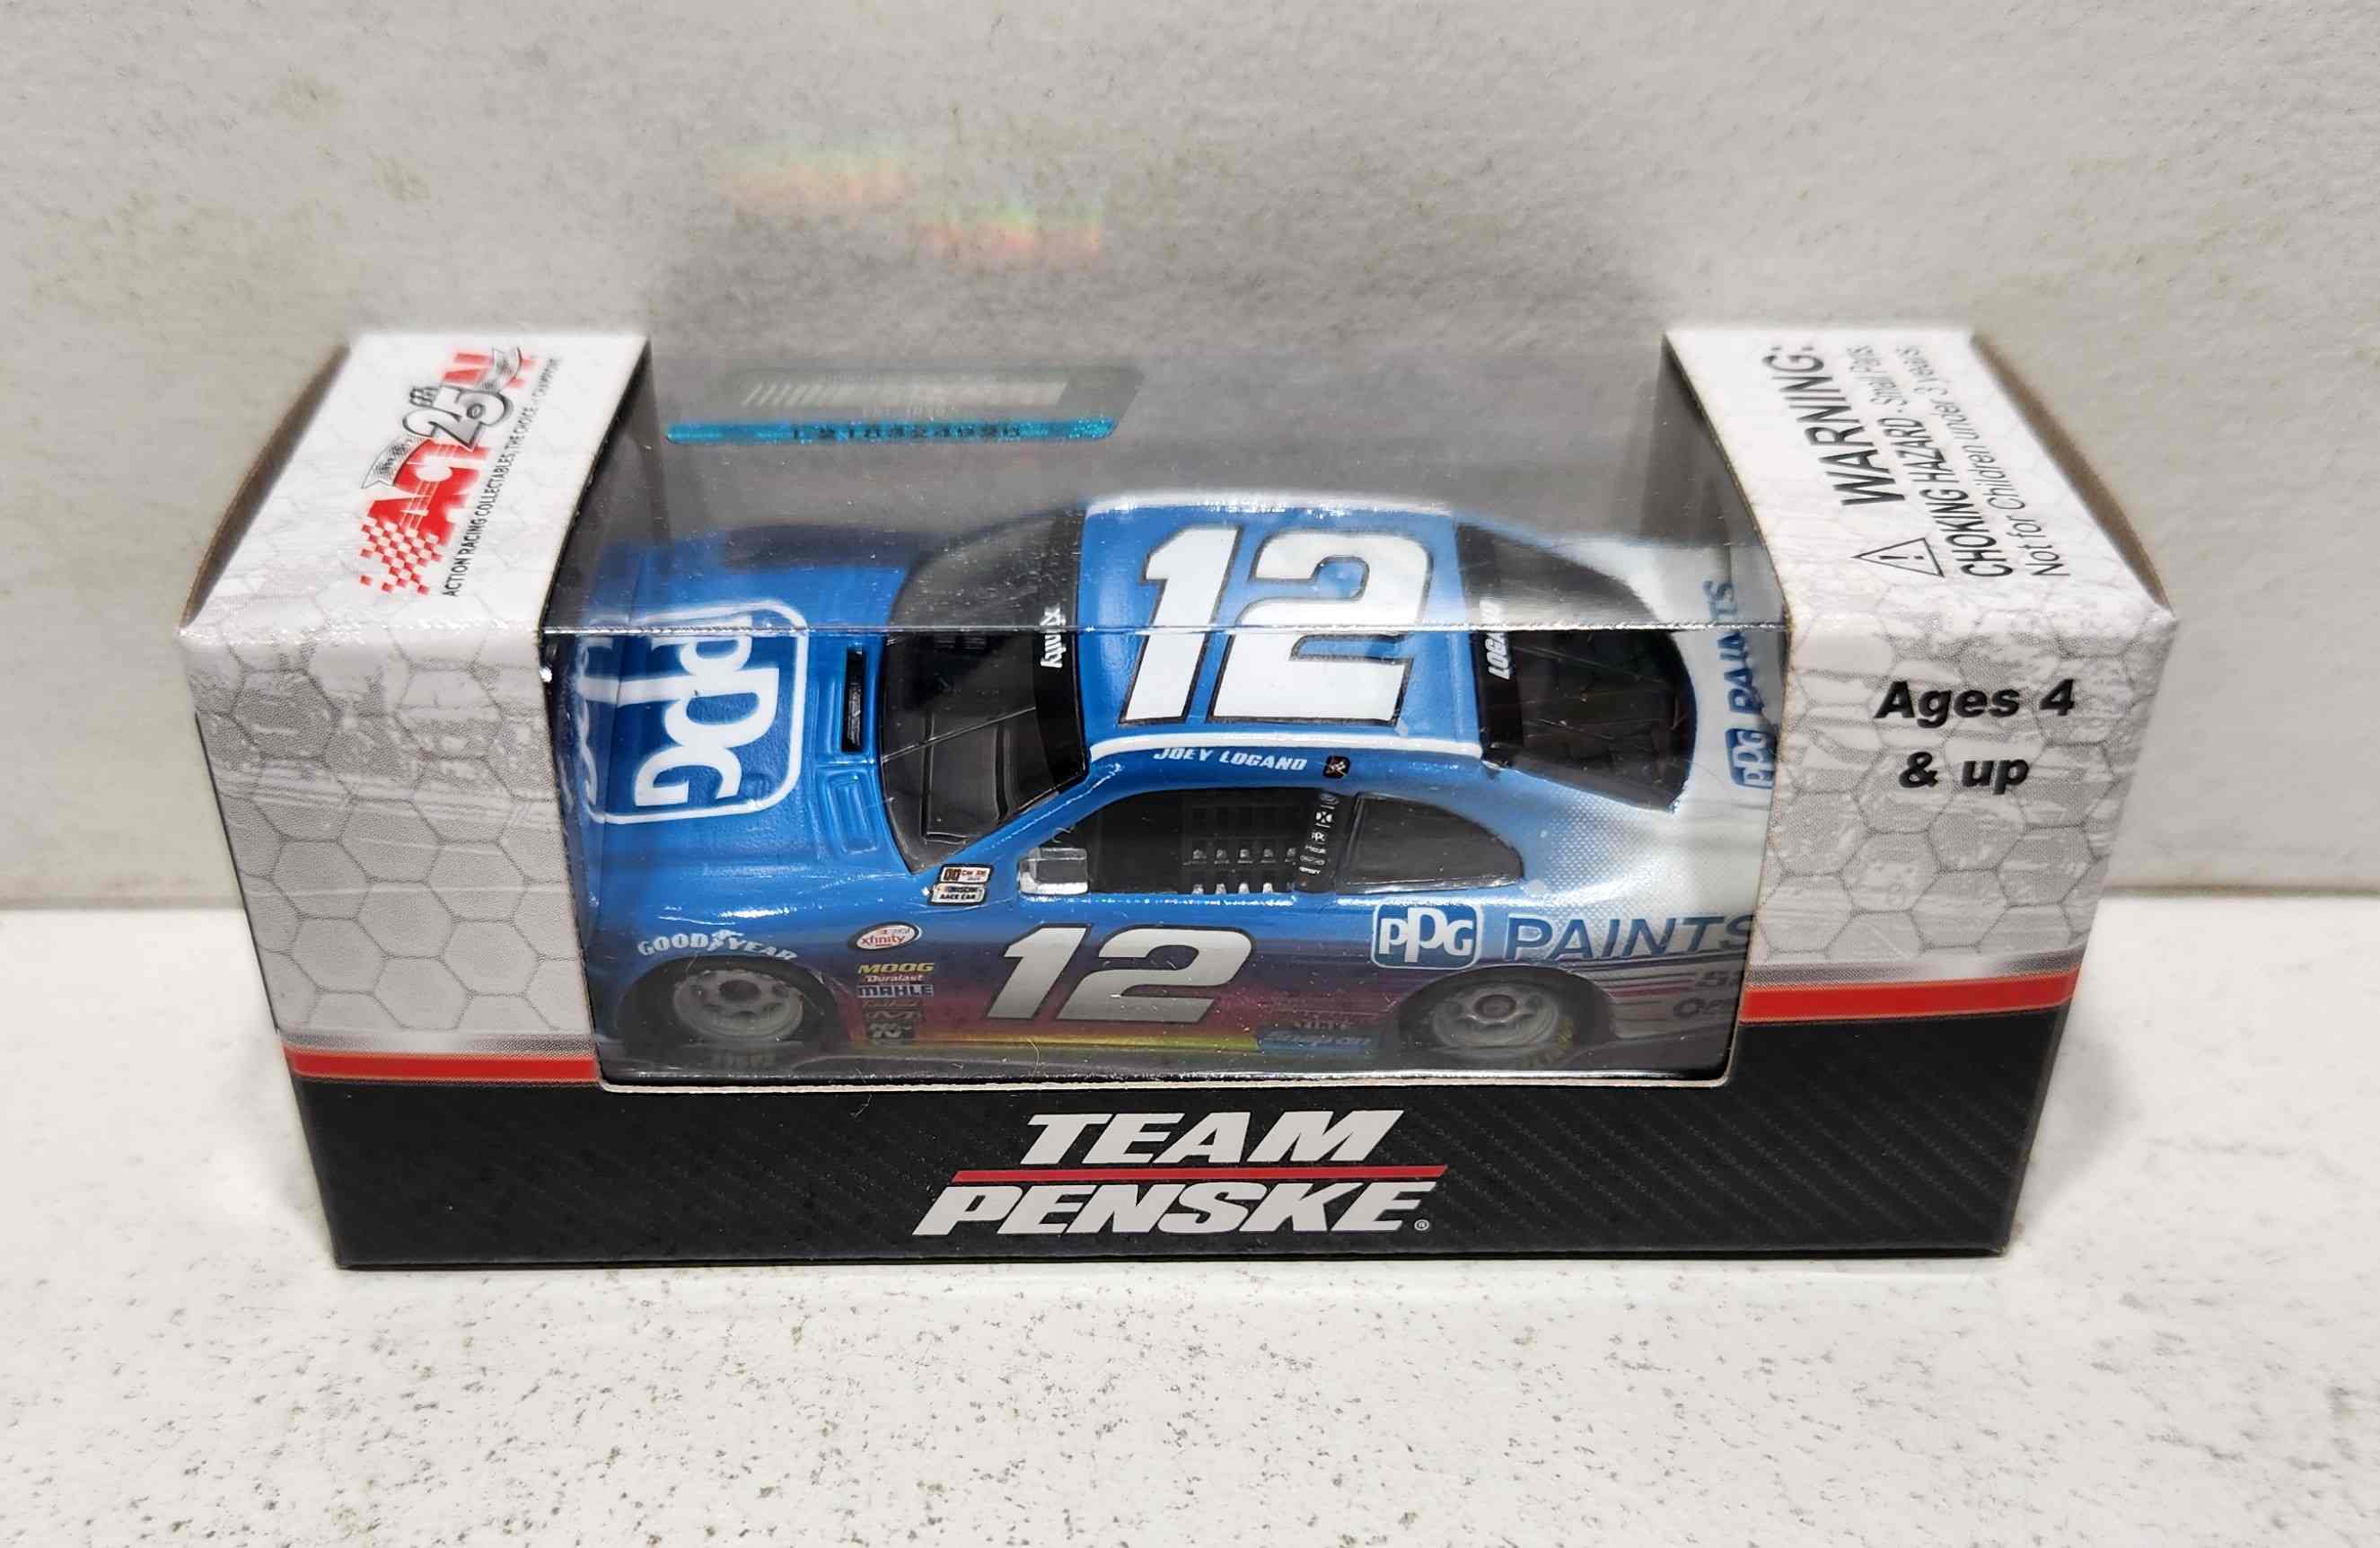 2017 Joey Logano 1/64th PPG Paints "Xfinity Series" Pitstop Series Mustang